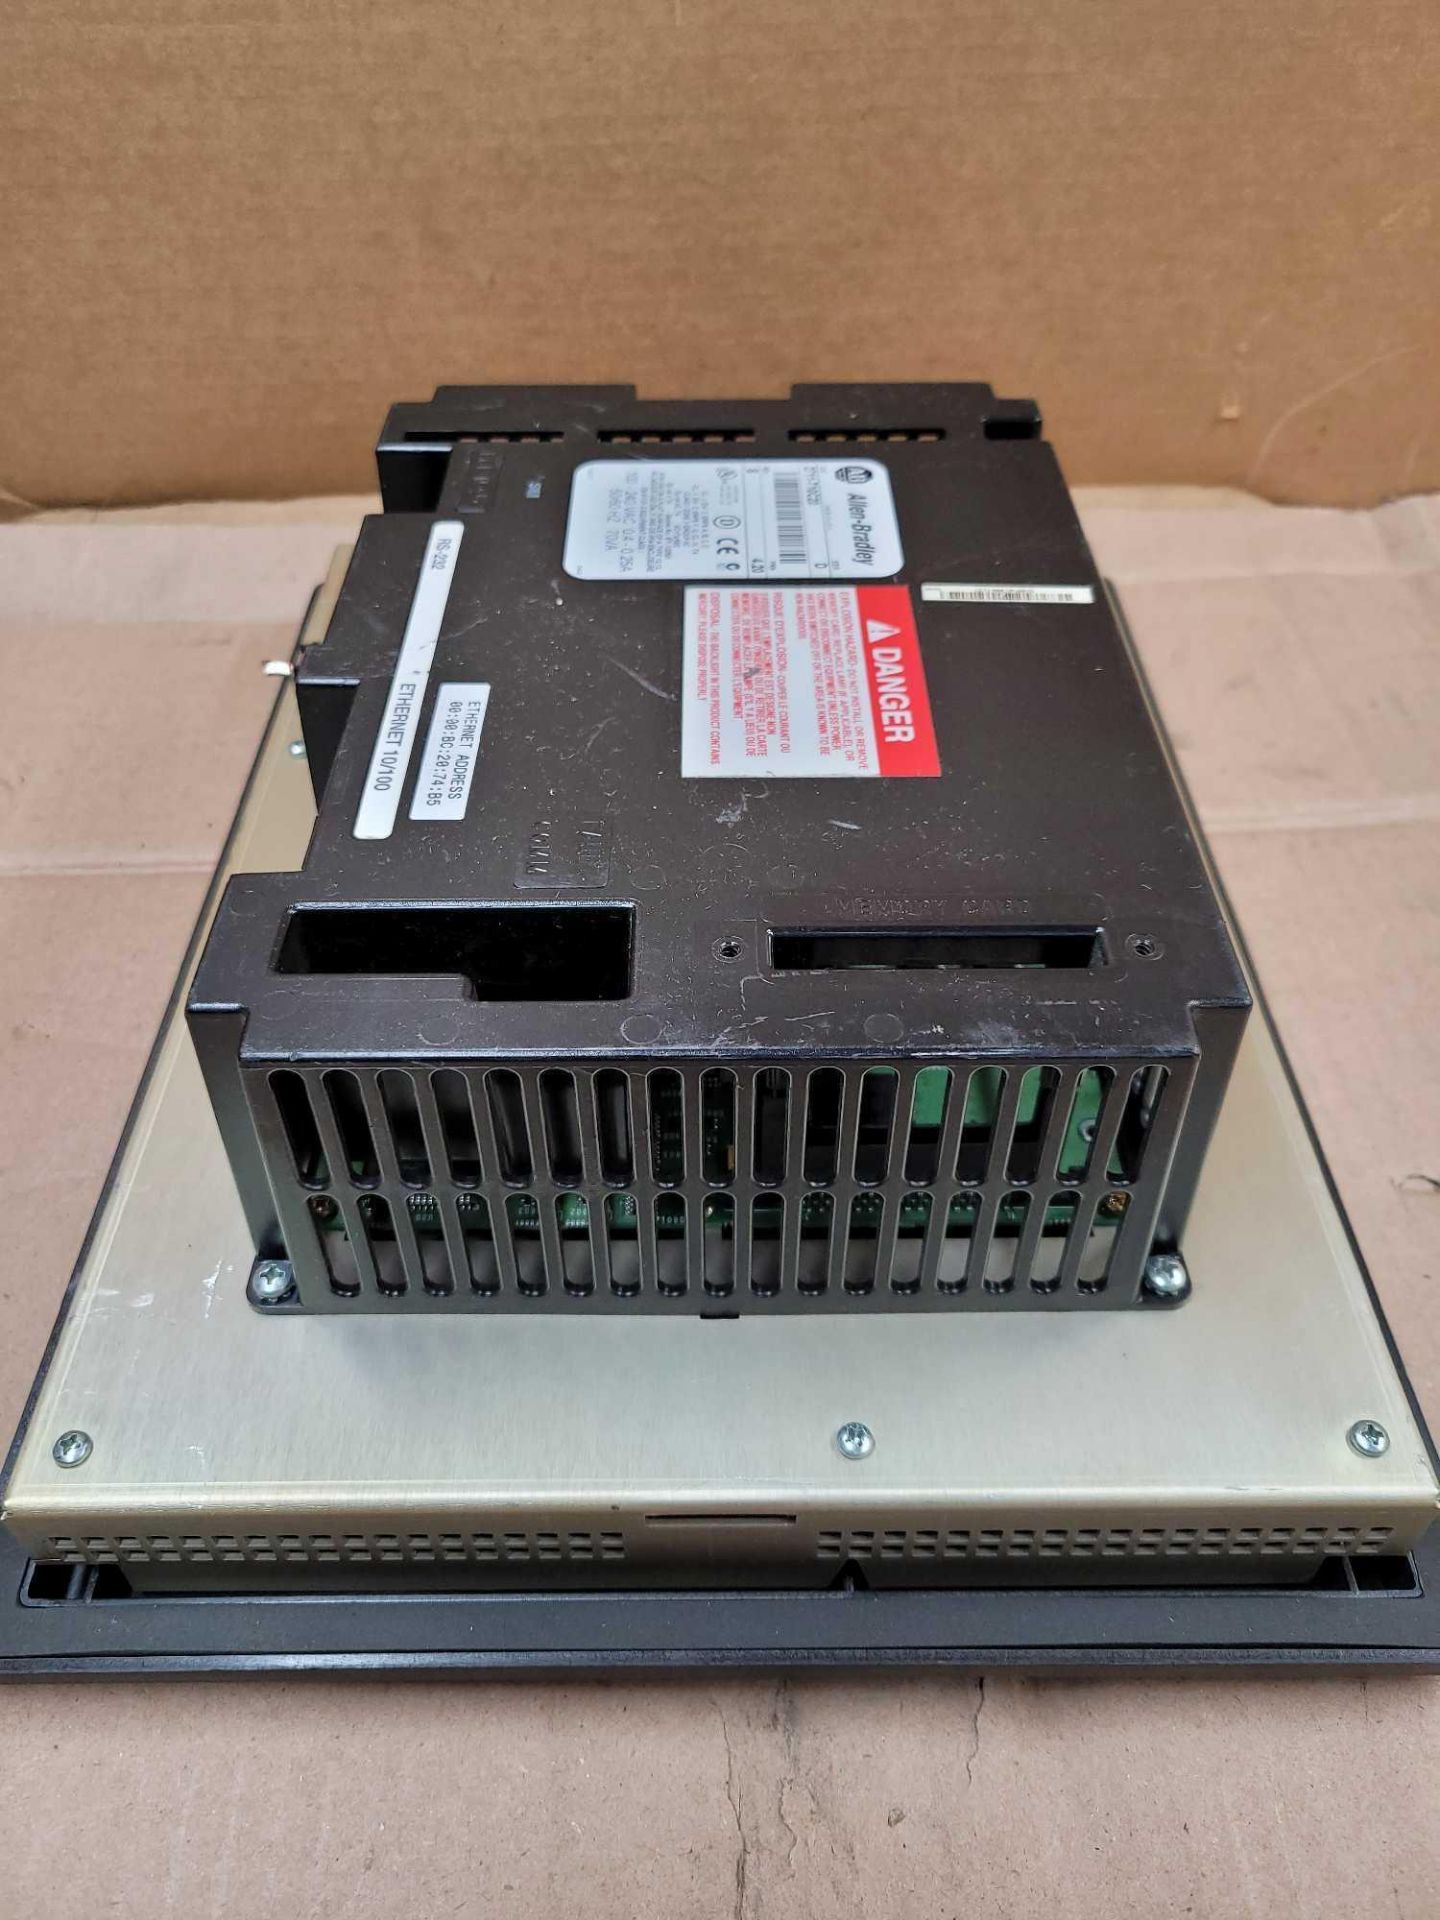 ALLEN BRADLEY 2711-T10C20 / Series D PanelView1000 Operator Interface  /  Lot Weight: 6.4 lbs - Image 5 of 7